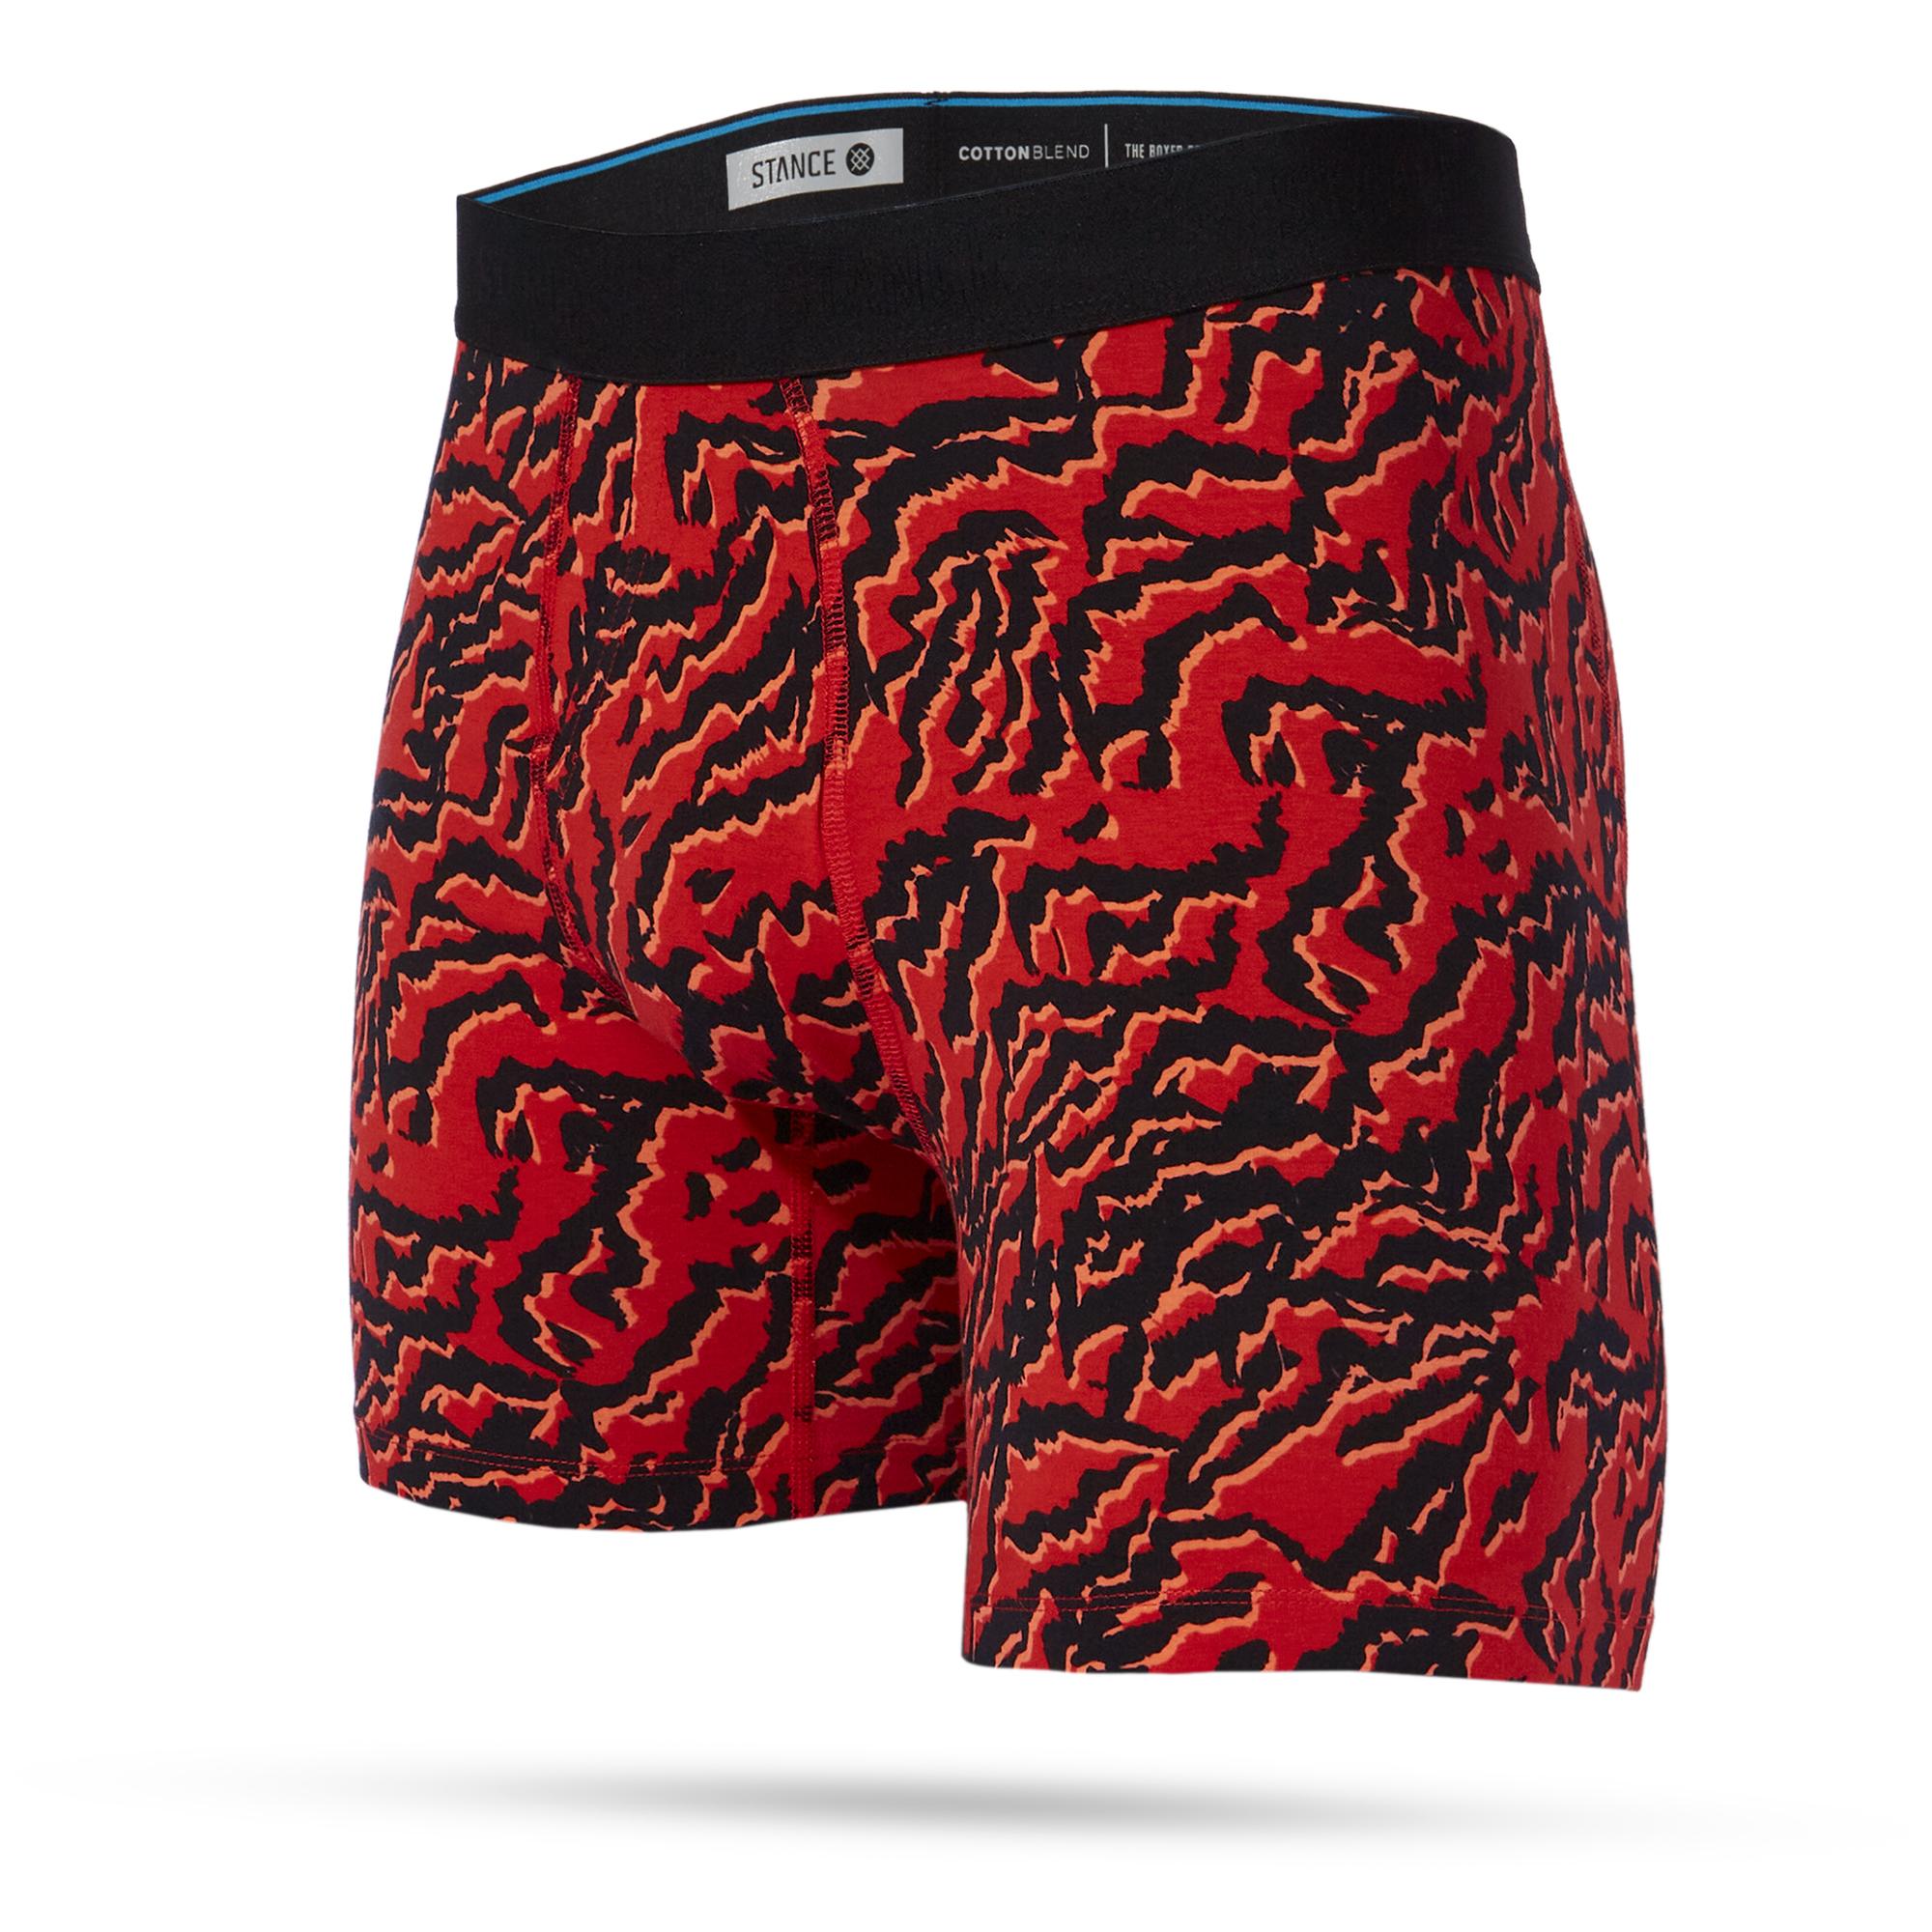 STANCE Underwear The Boxer Brief TigTag Tiger Black Red Size Large NEW